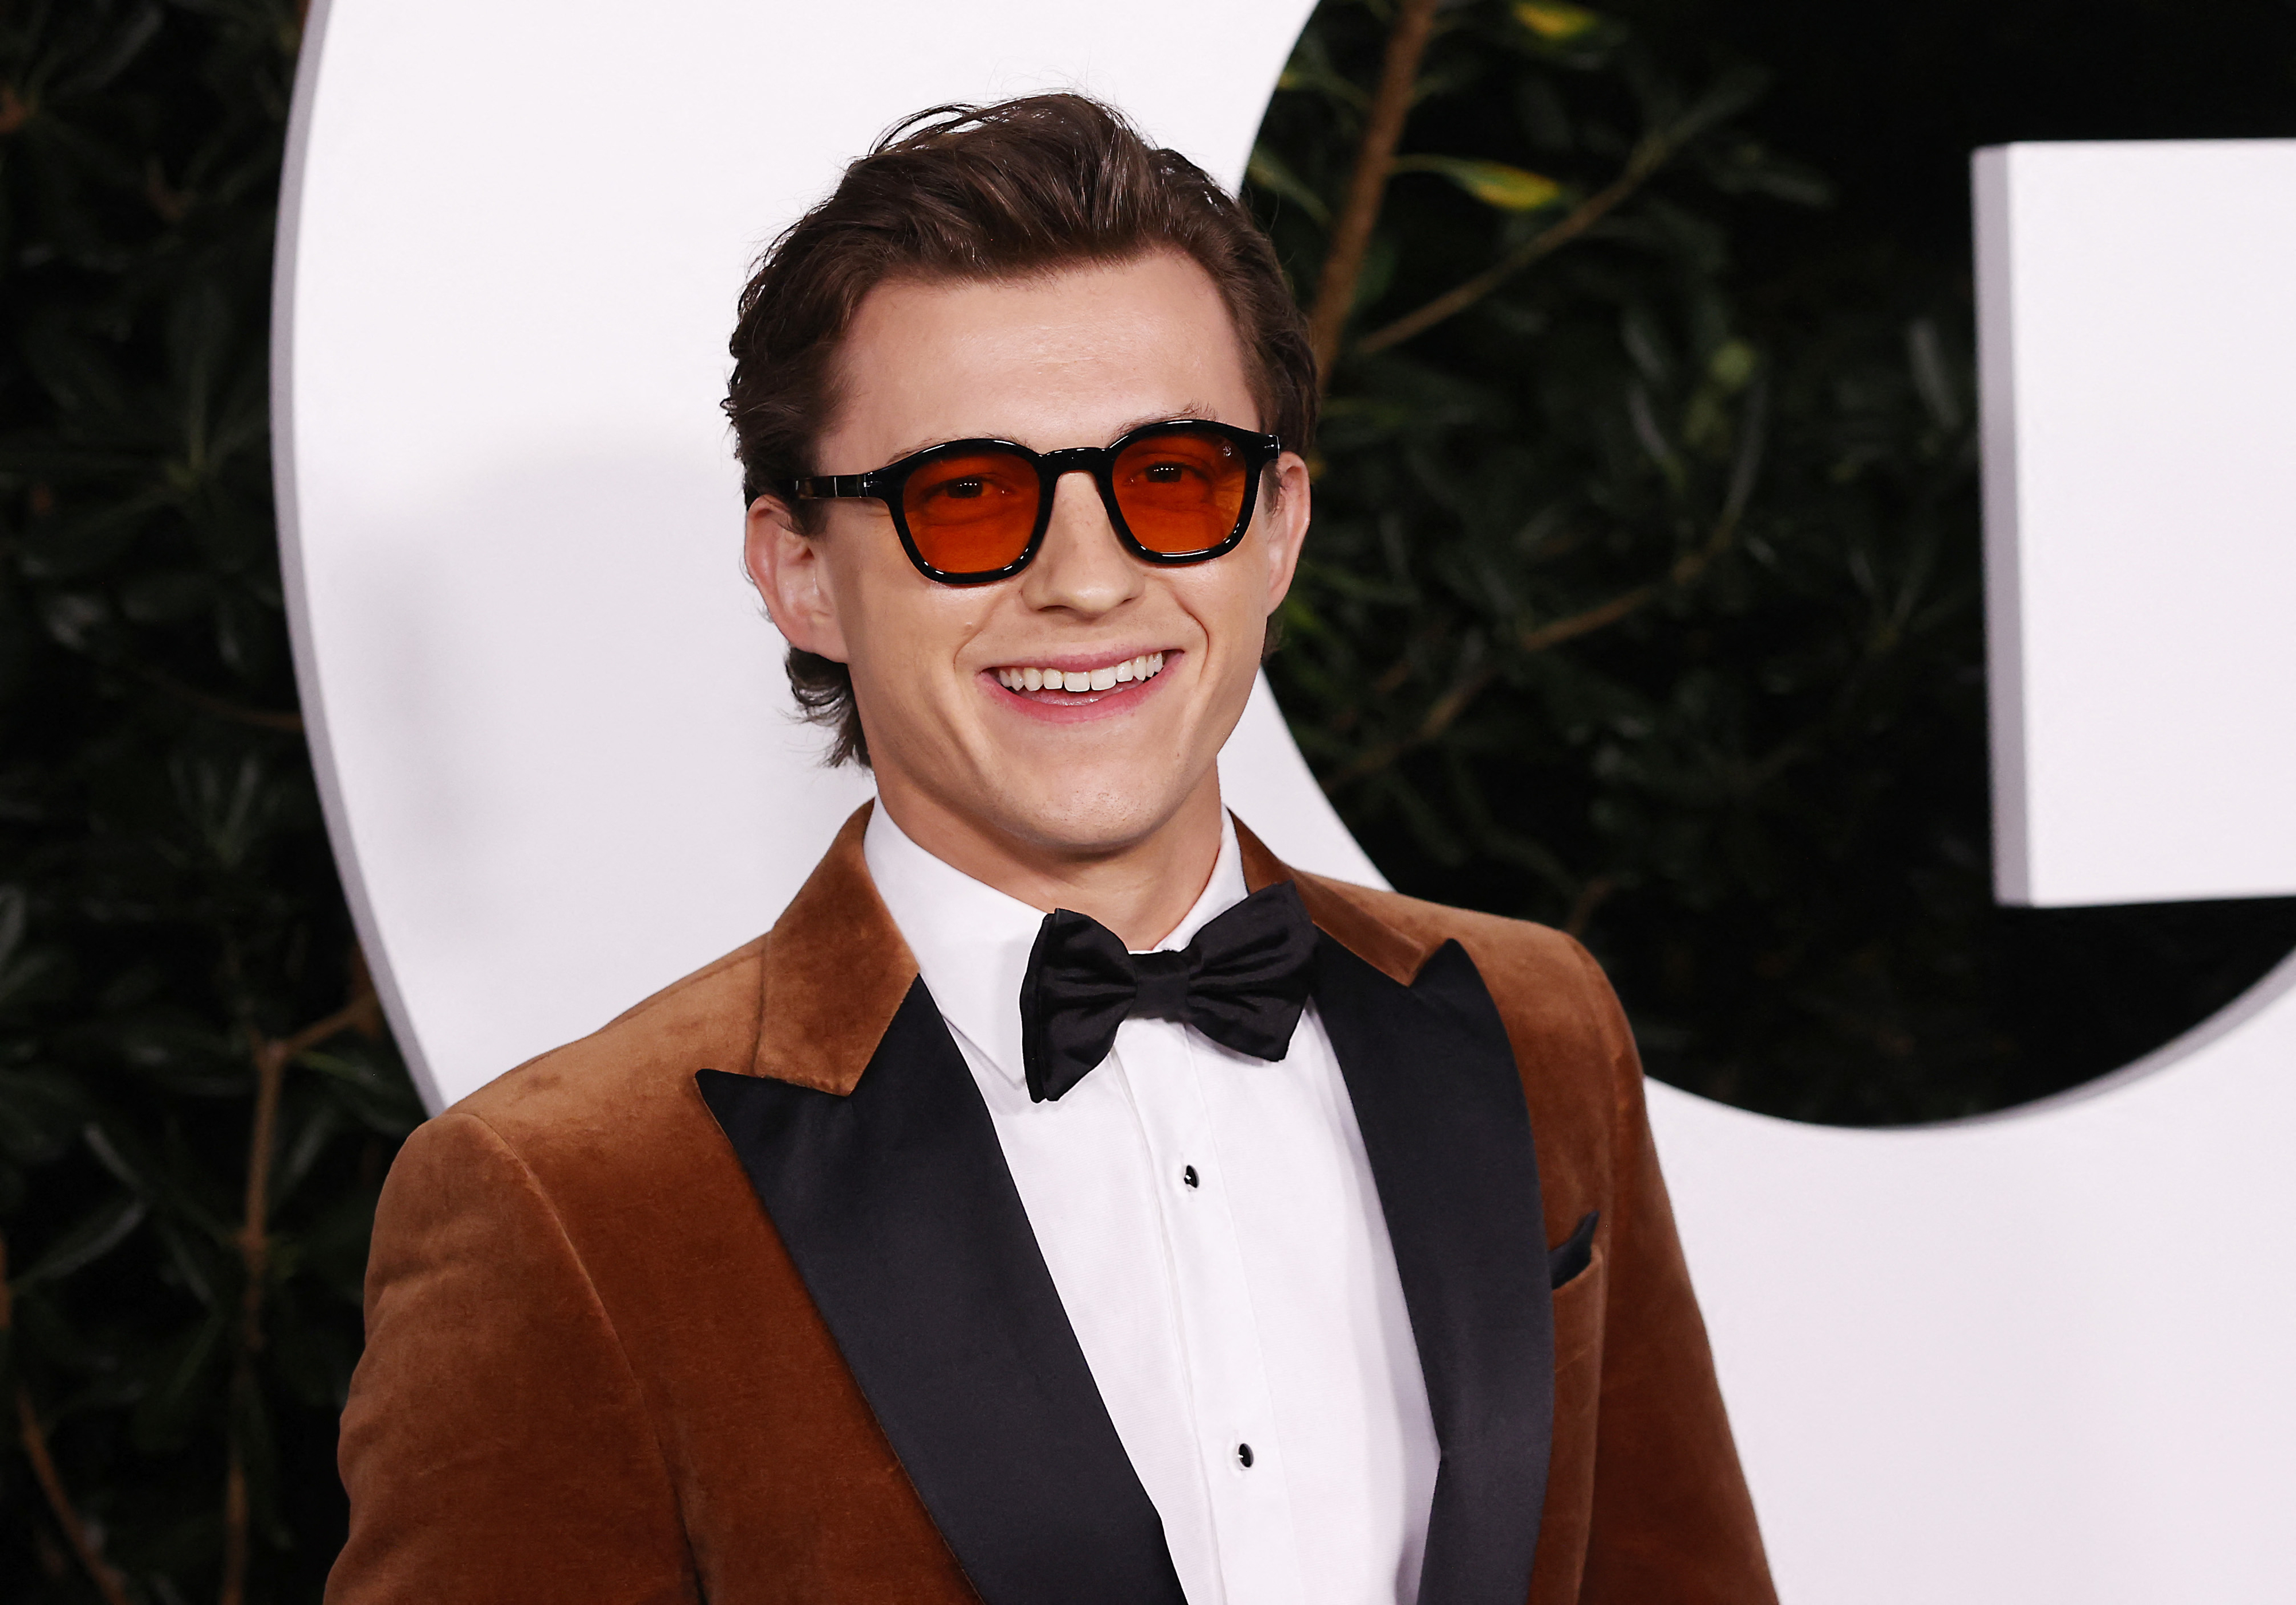 Tom in a velvet suit with bow tie and tinted sunglasses smiling at an event